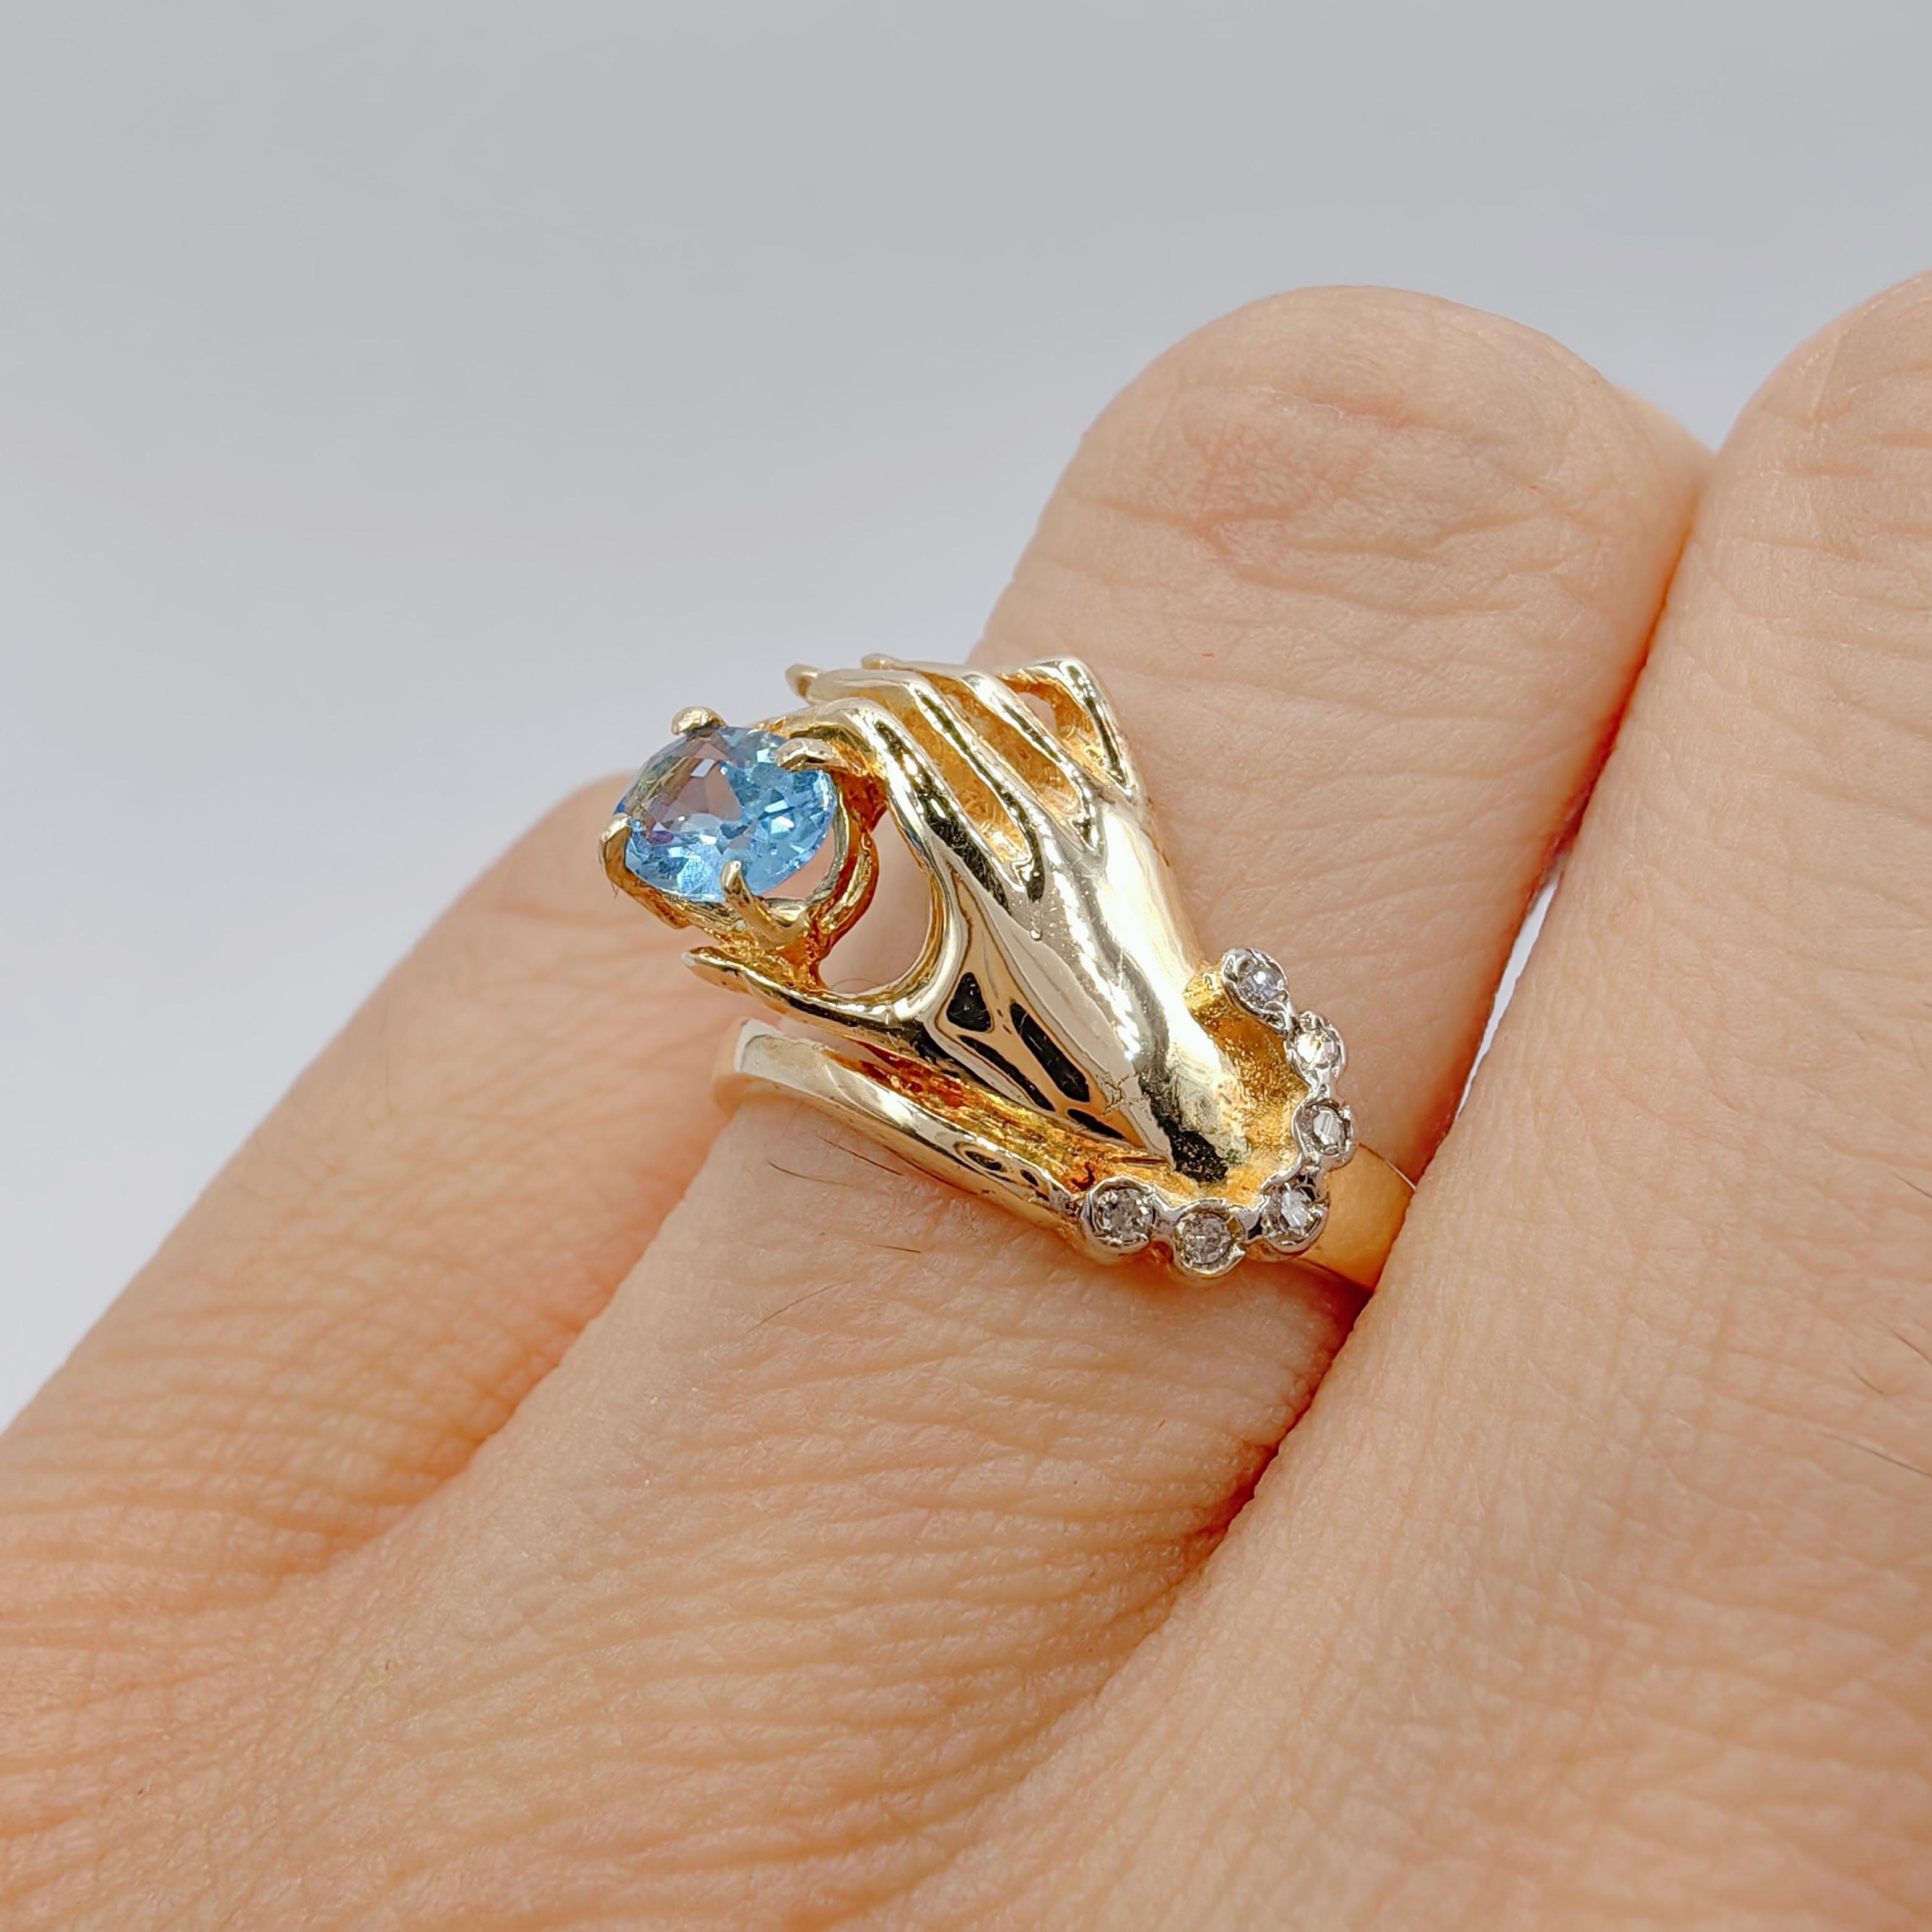 Oval-cut Blue Topaz in a Hand Diamond Ring in 14K Yellow Gold For Sale 4